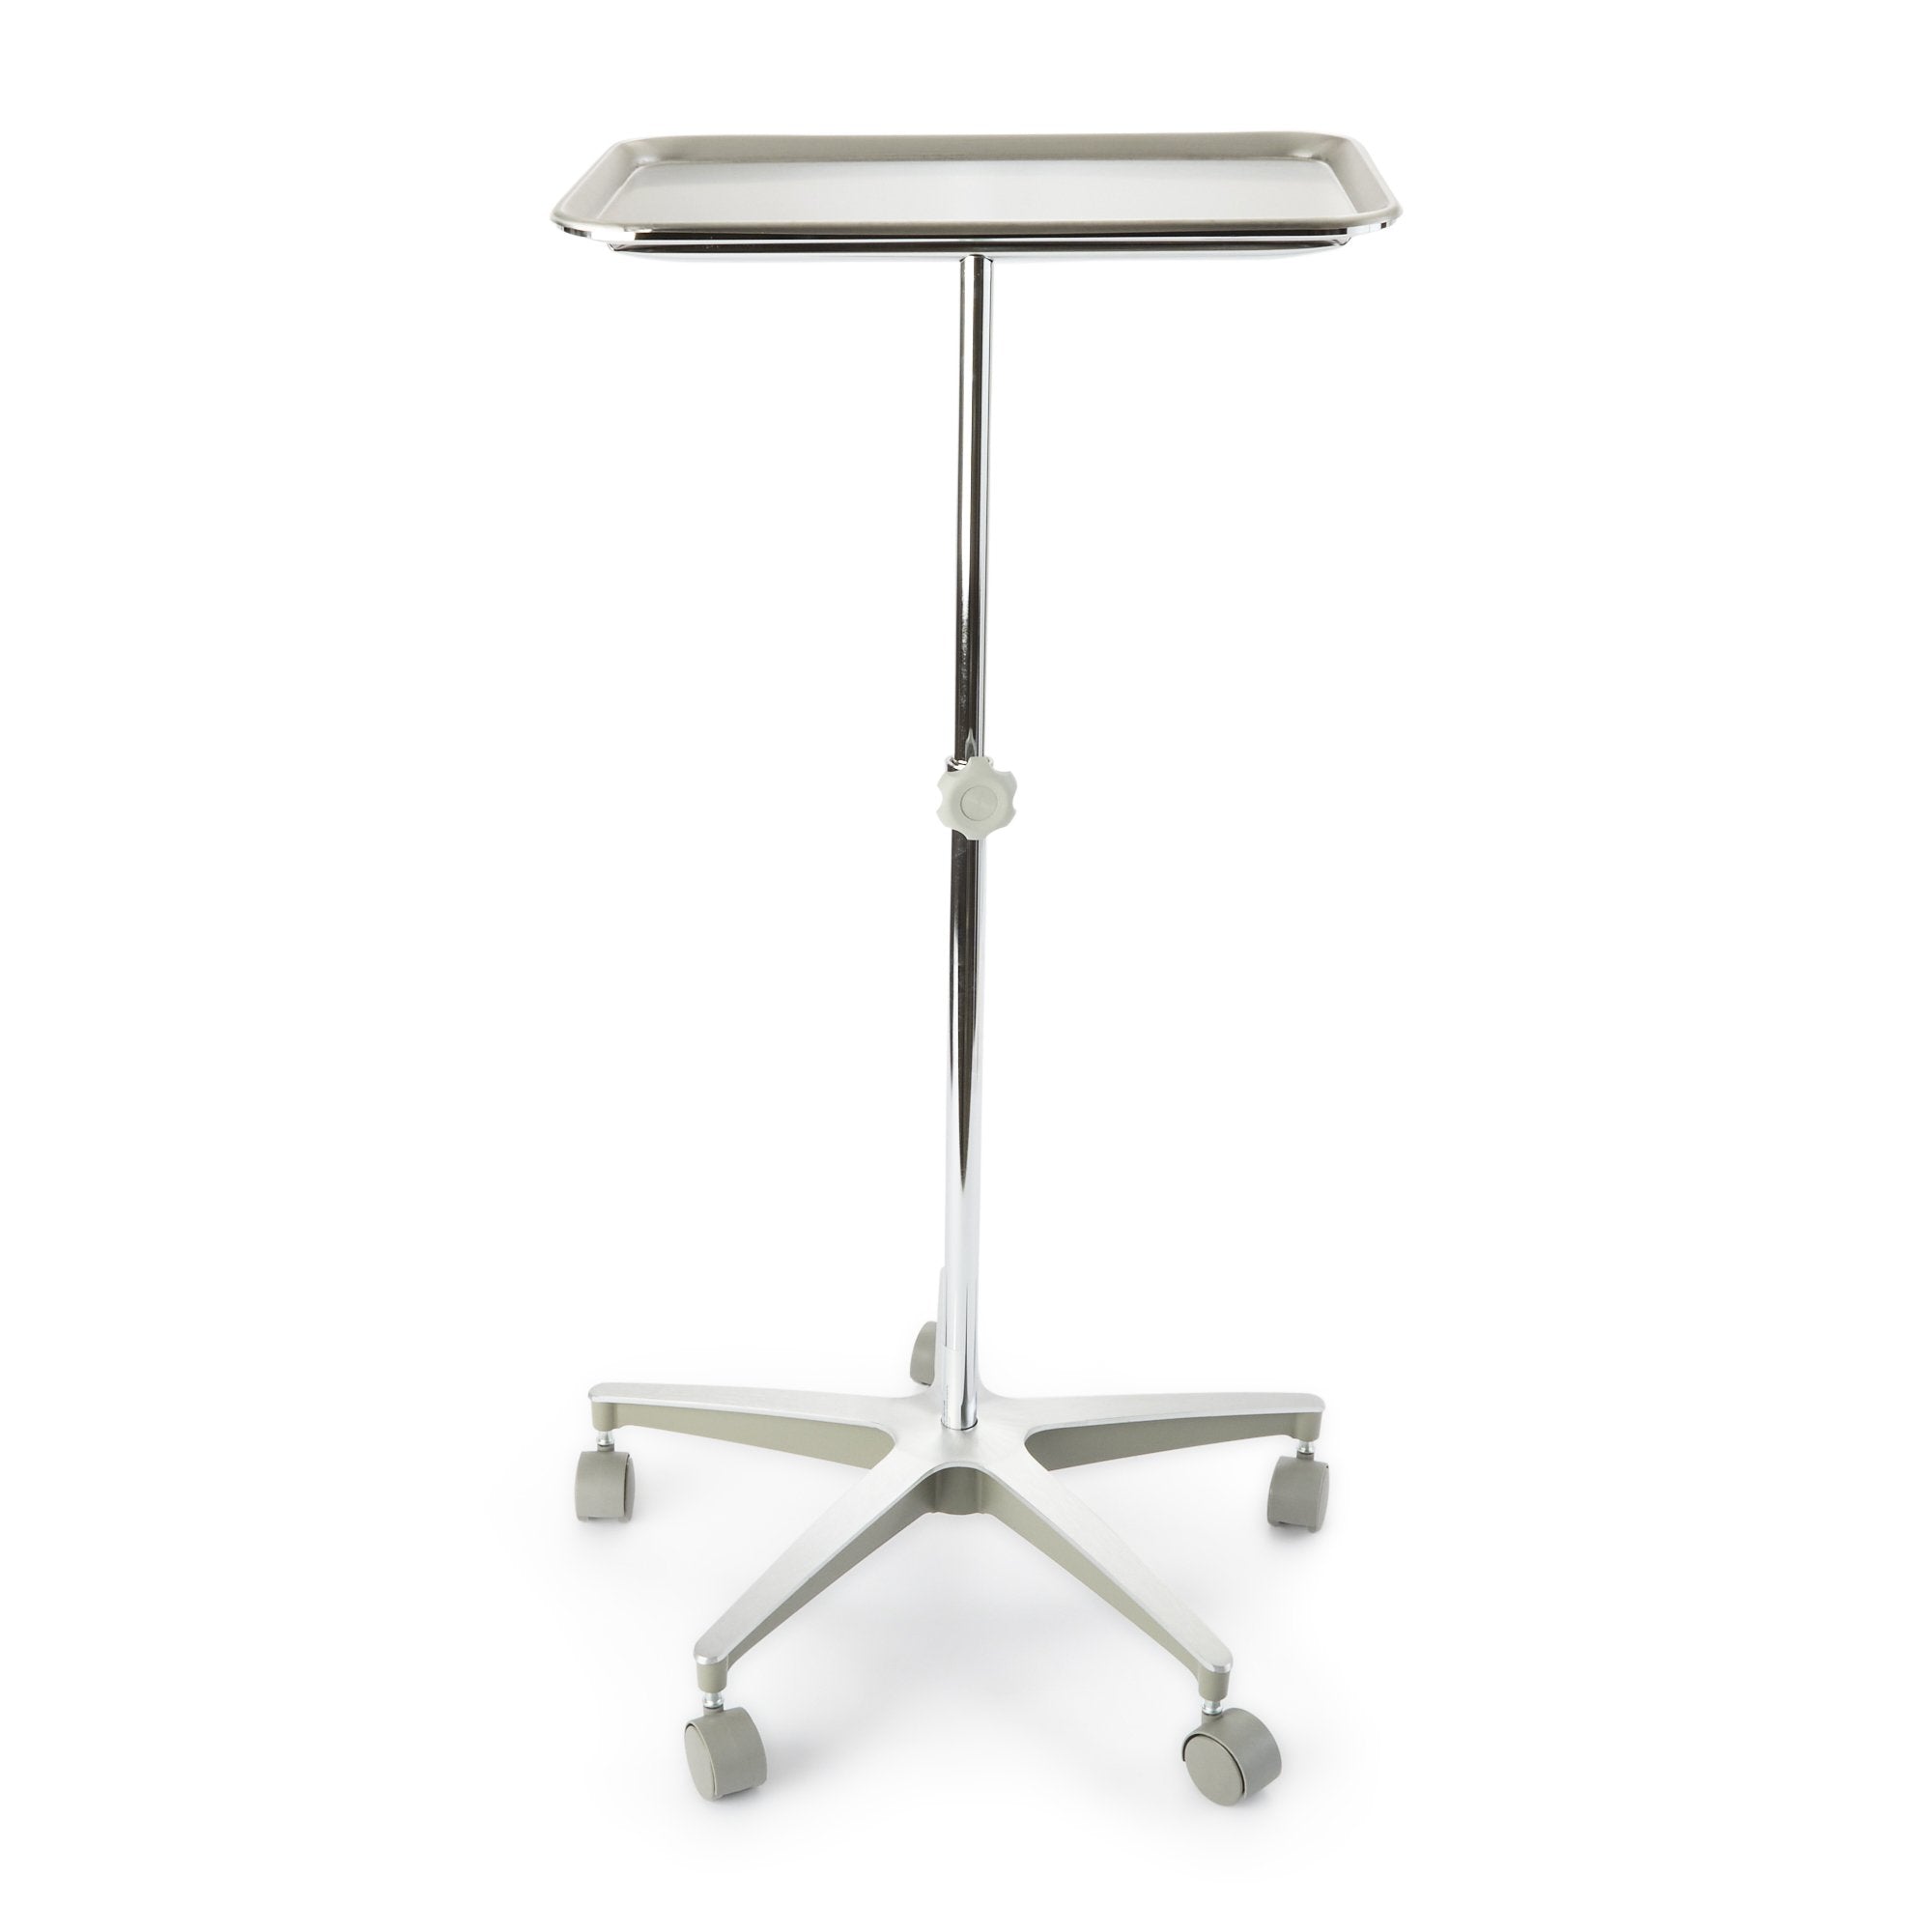 Instrument Stand McKesson 5 lbs. Tray Five Leg Base 29.25 - 48.75 Inch 12.62 X 19.25 X 0.75 Inch